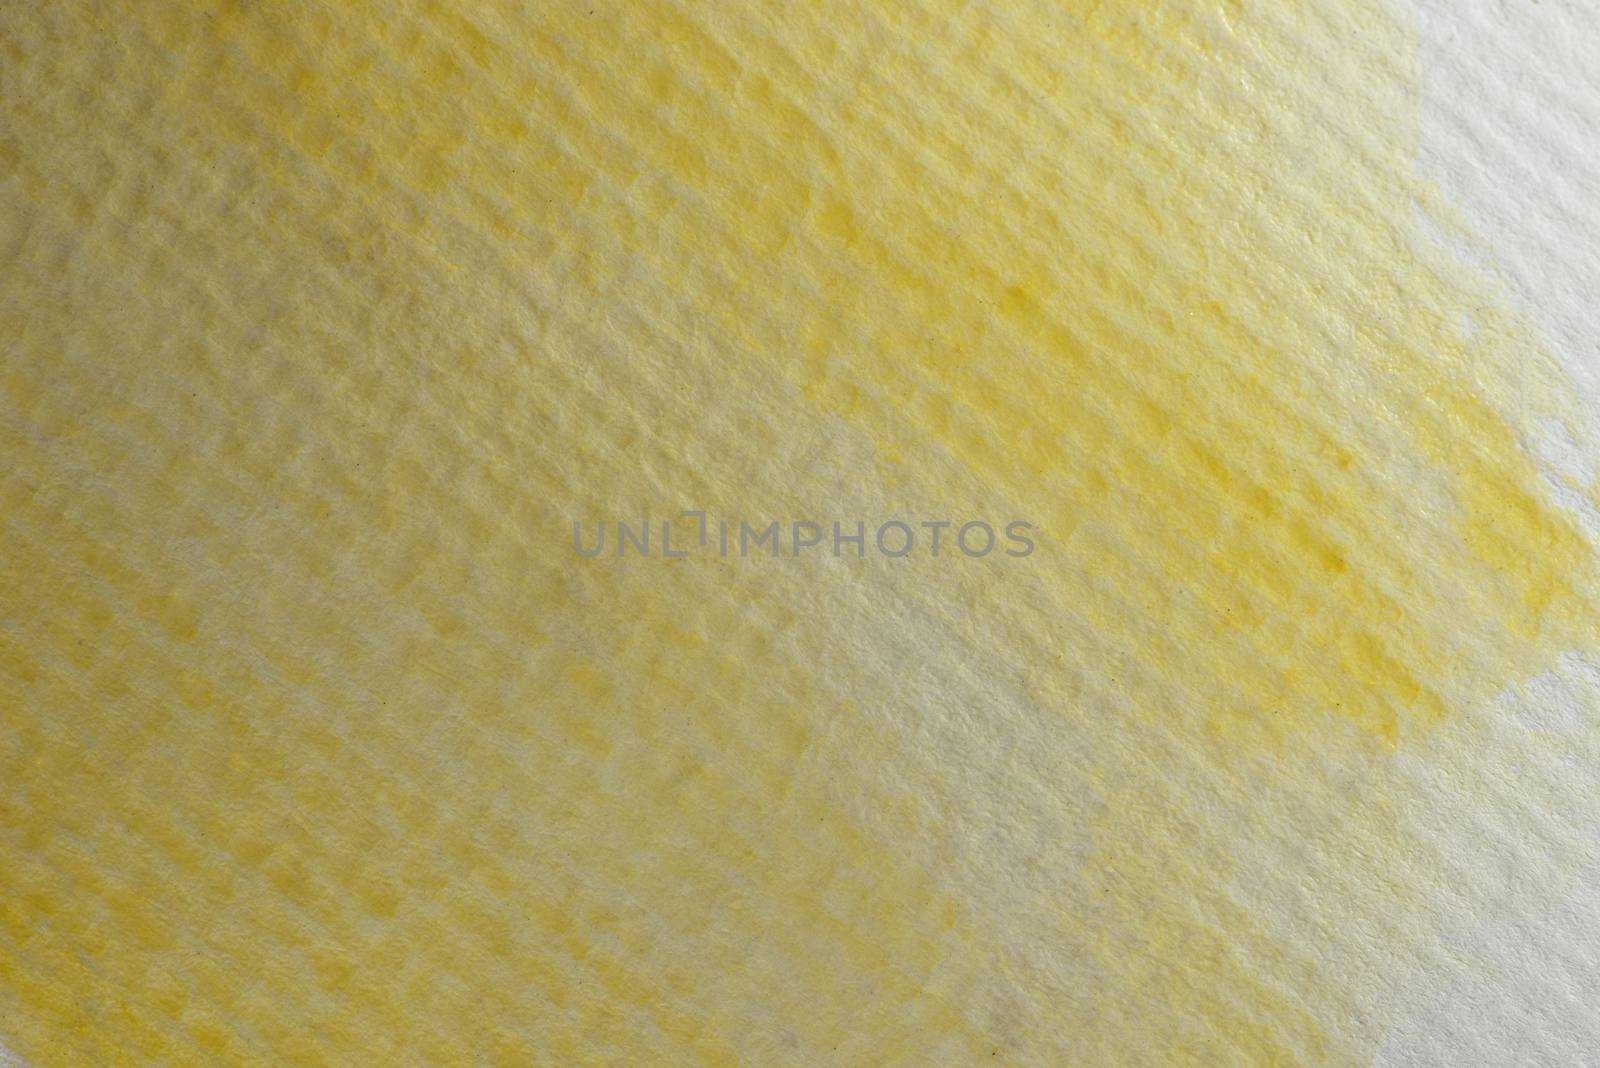 Watercolor art grunge texture backdrop abstract background by Vanzyst